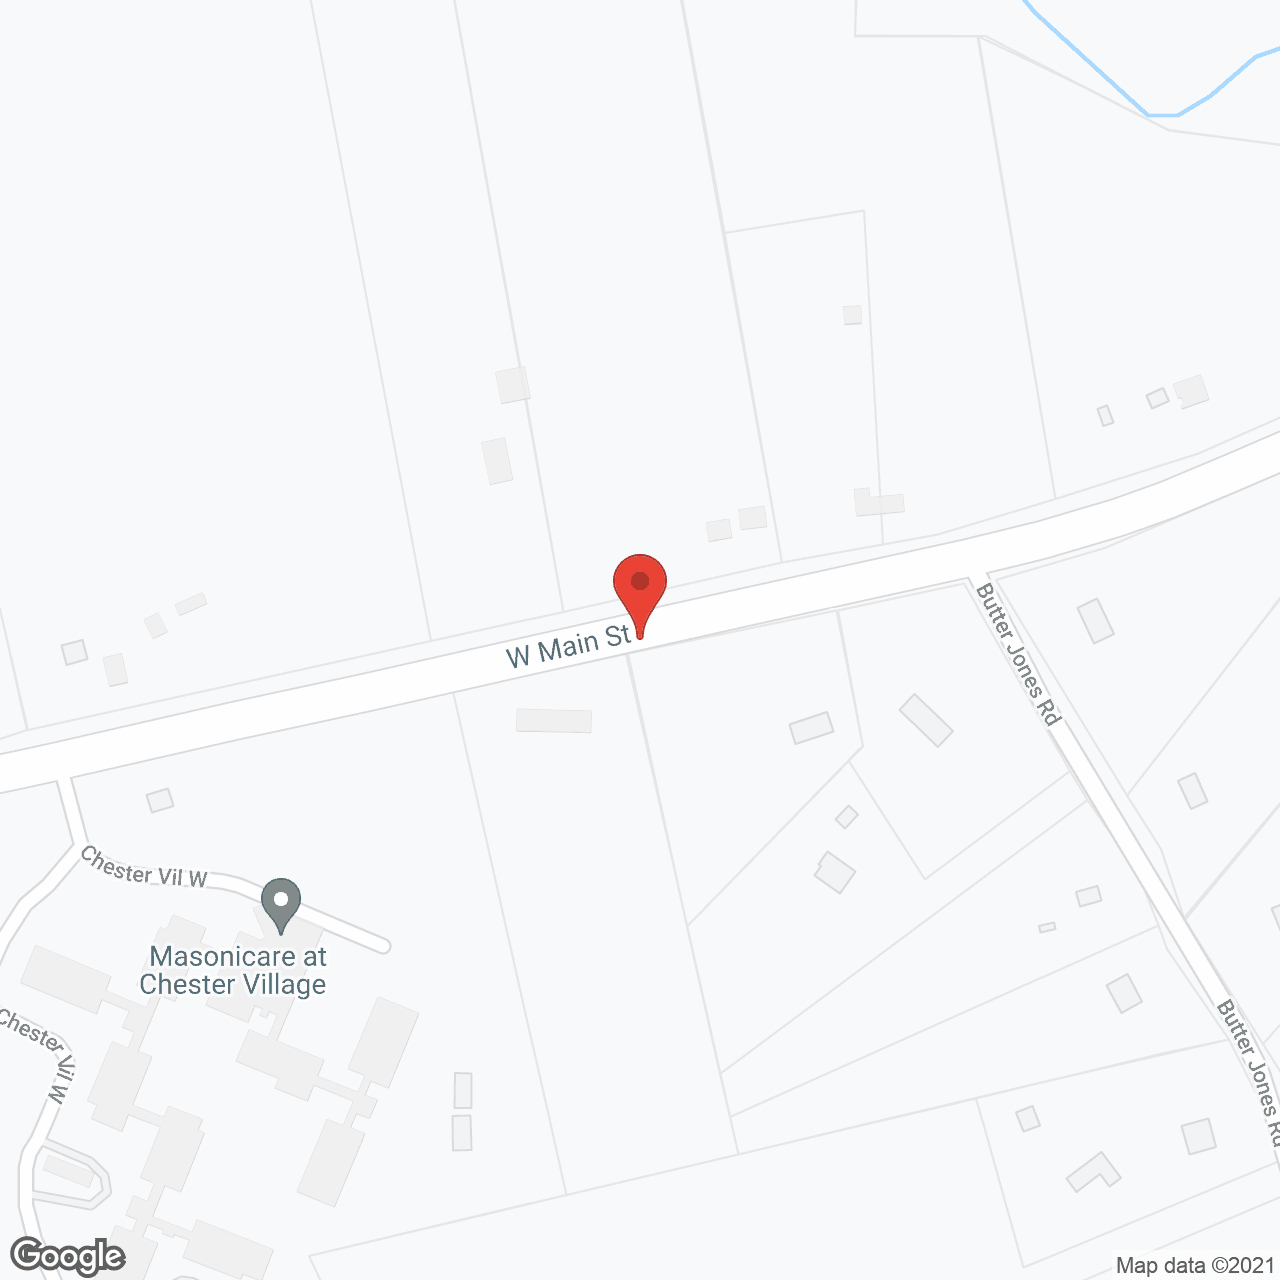 Masonicare at Chester Village in google map